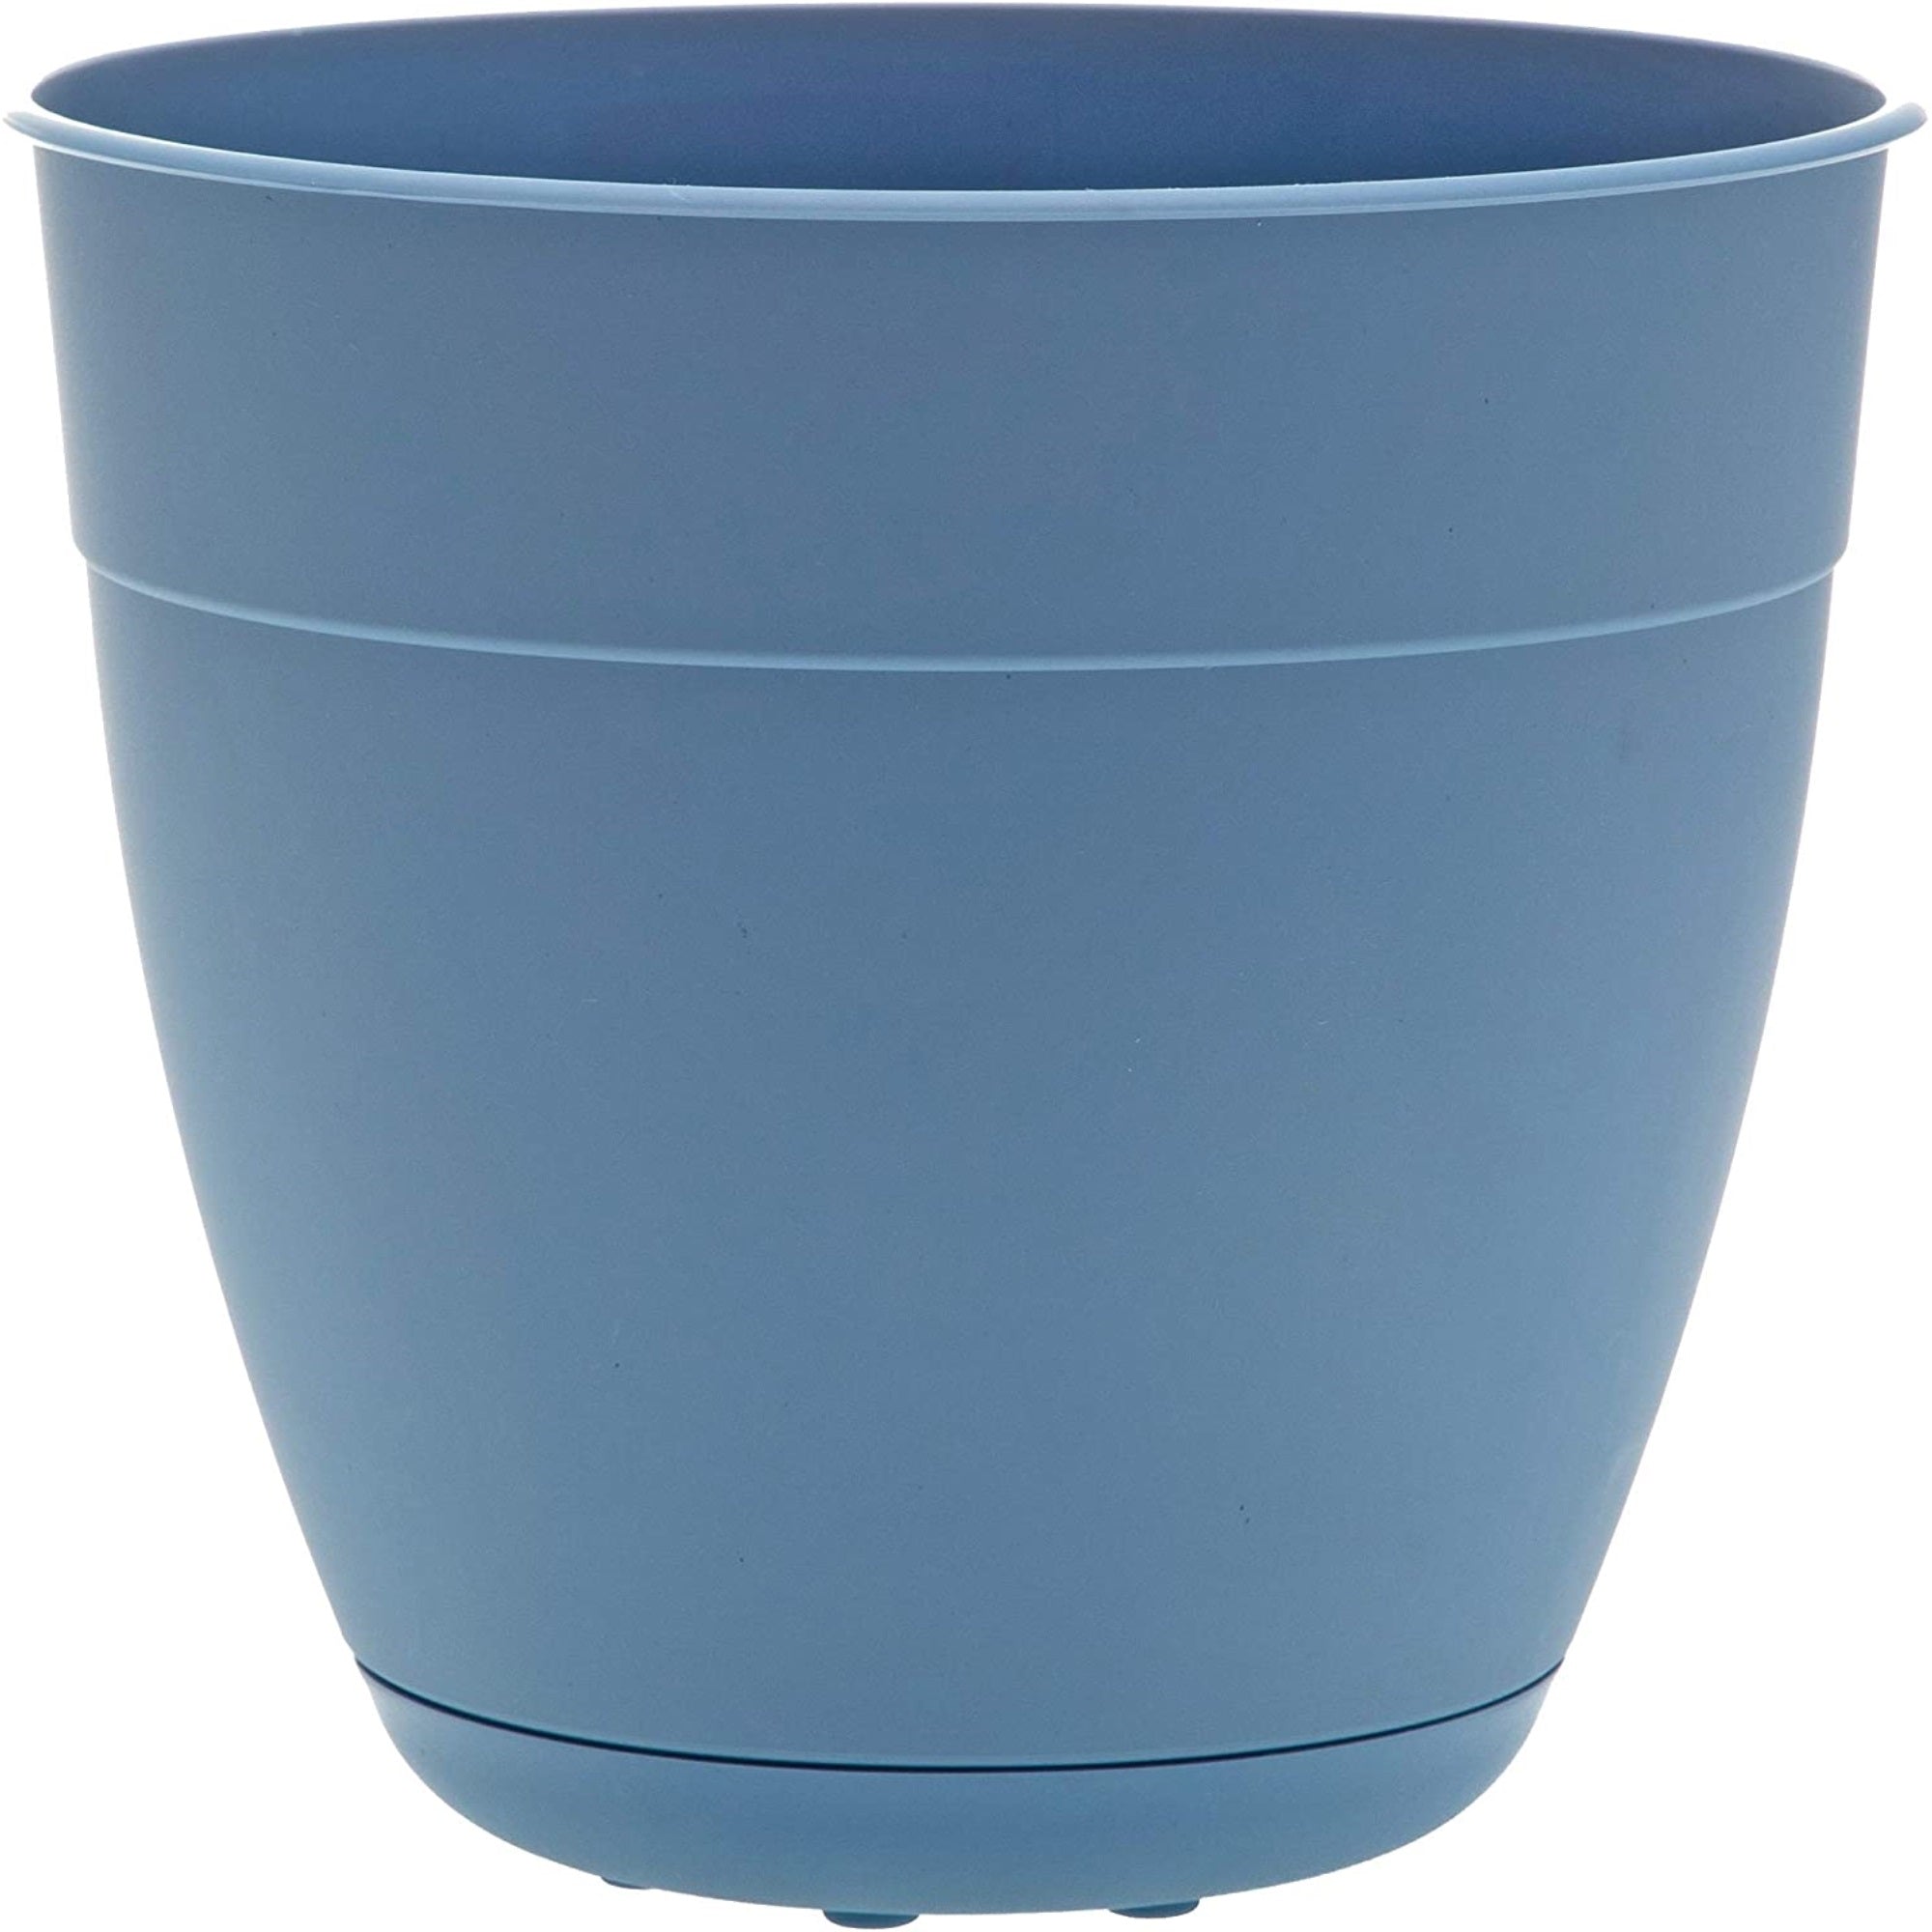 Bloem Dayton Recycled Ocean Plastic Planter With Attached Saucer